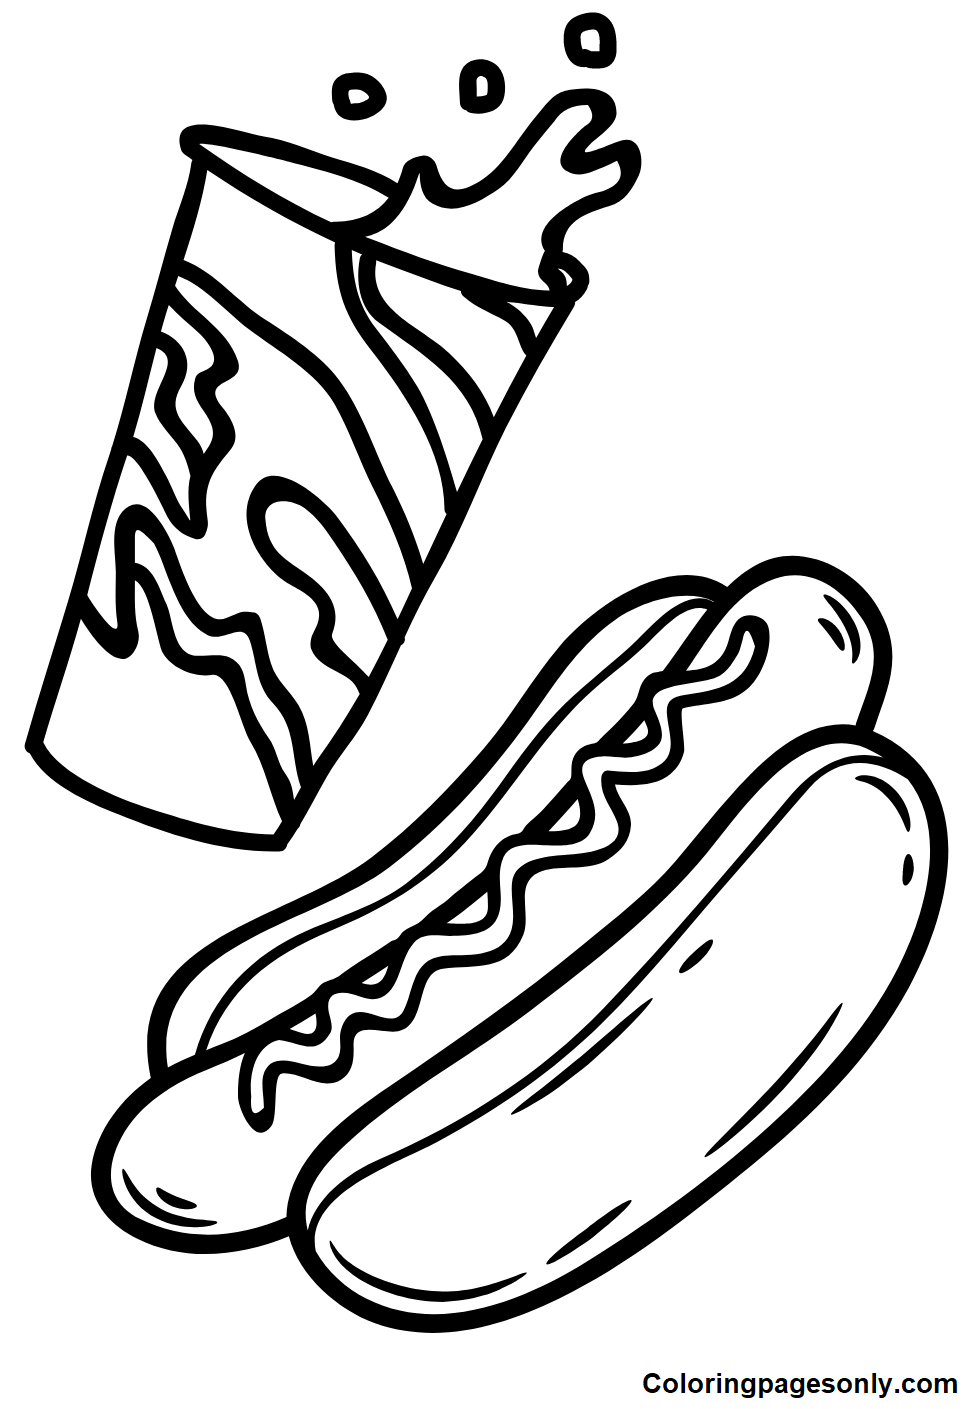 Soda and Hot Dog Coloring Pages